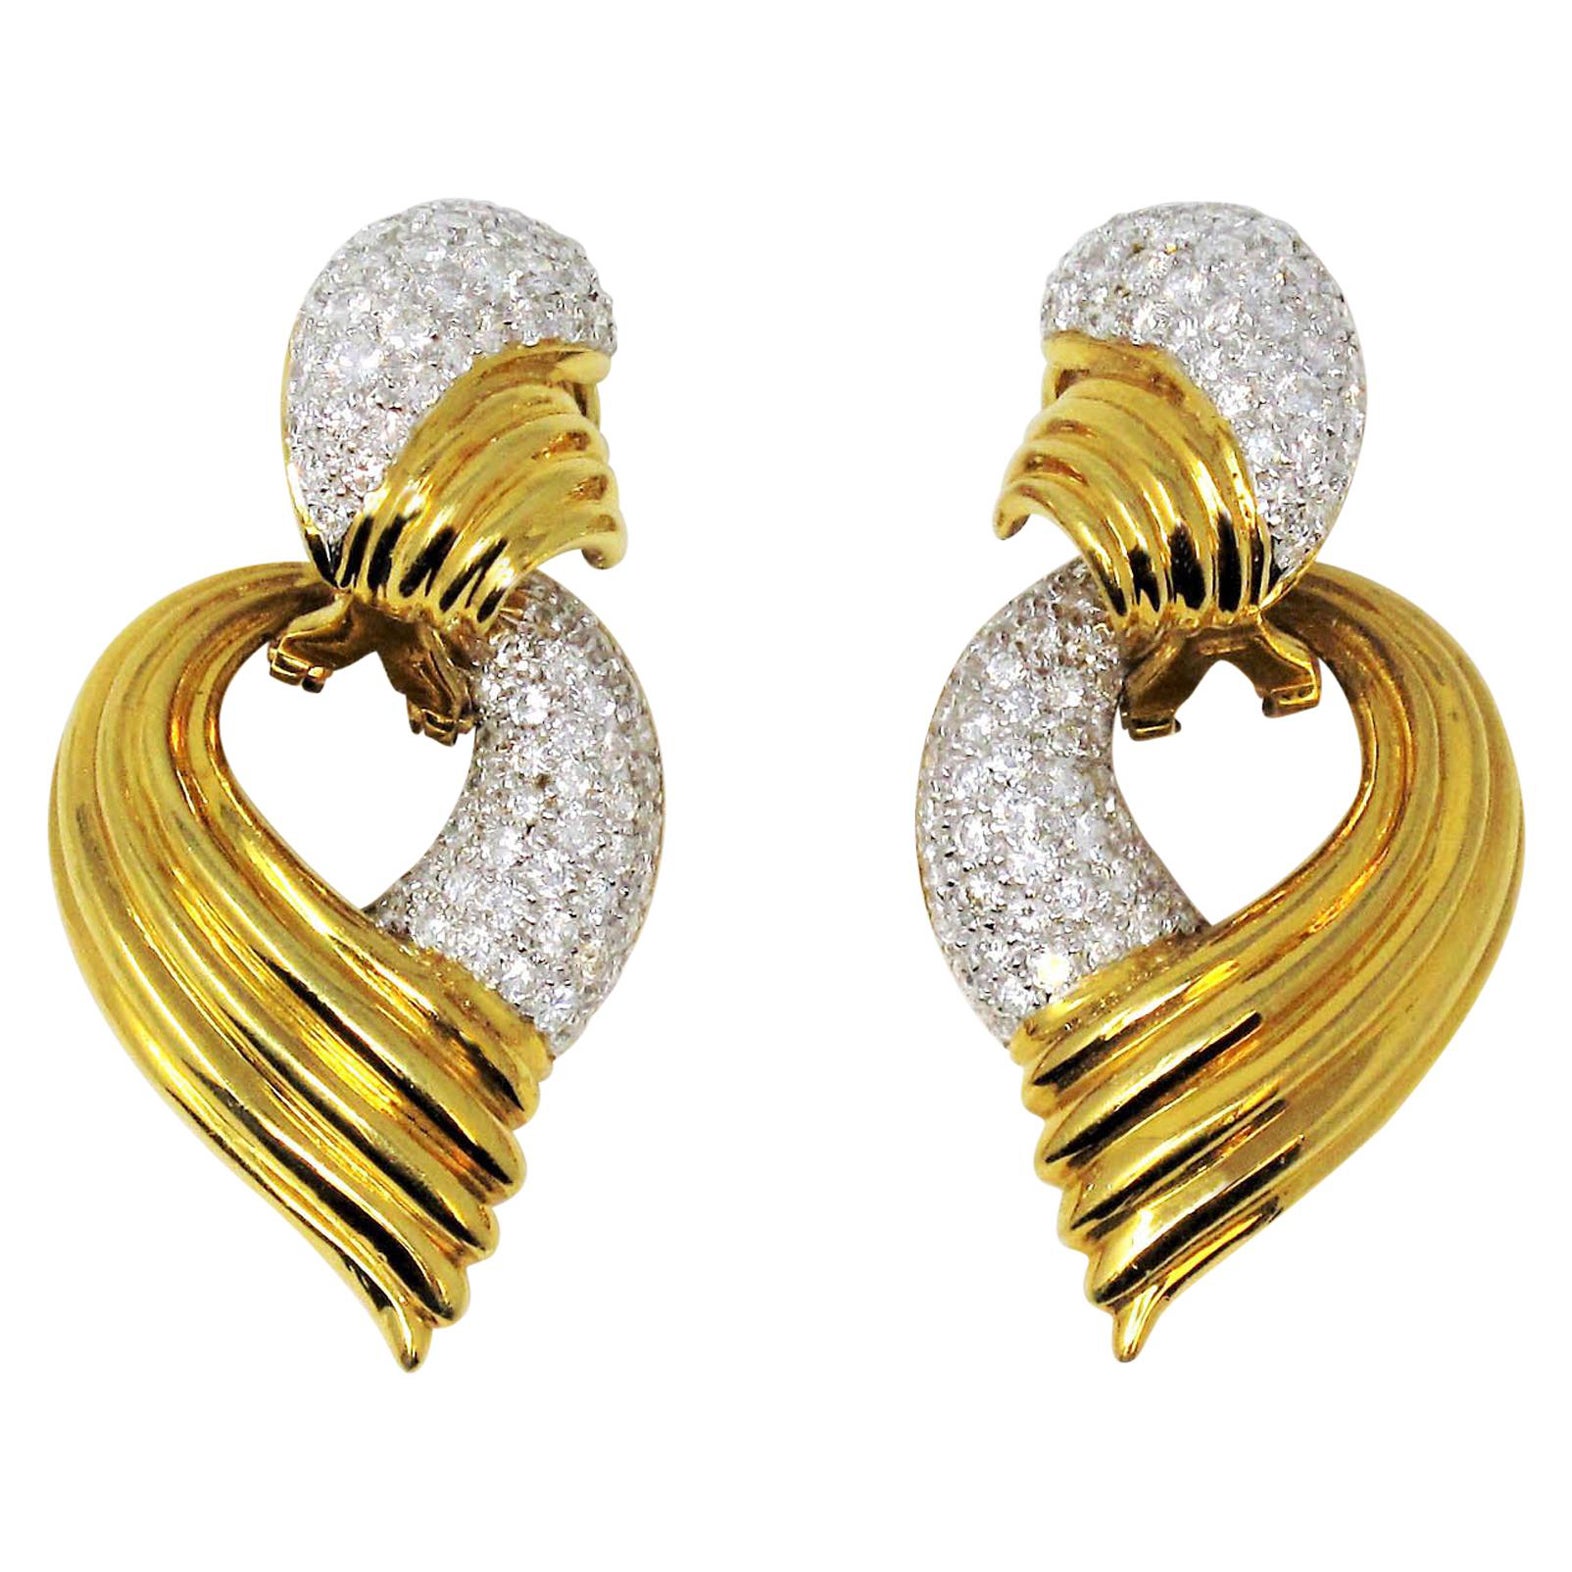 2.95 Carats Total Pave Diamond Door Knocker Non-Pierced Earrings 18K Yellow Gold For Sale